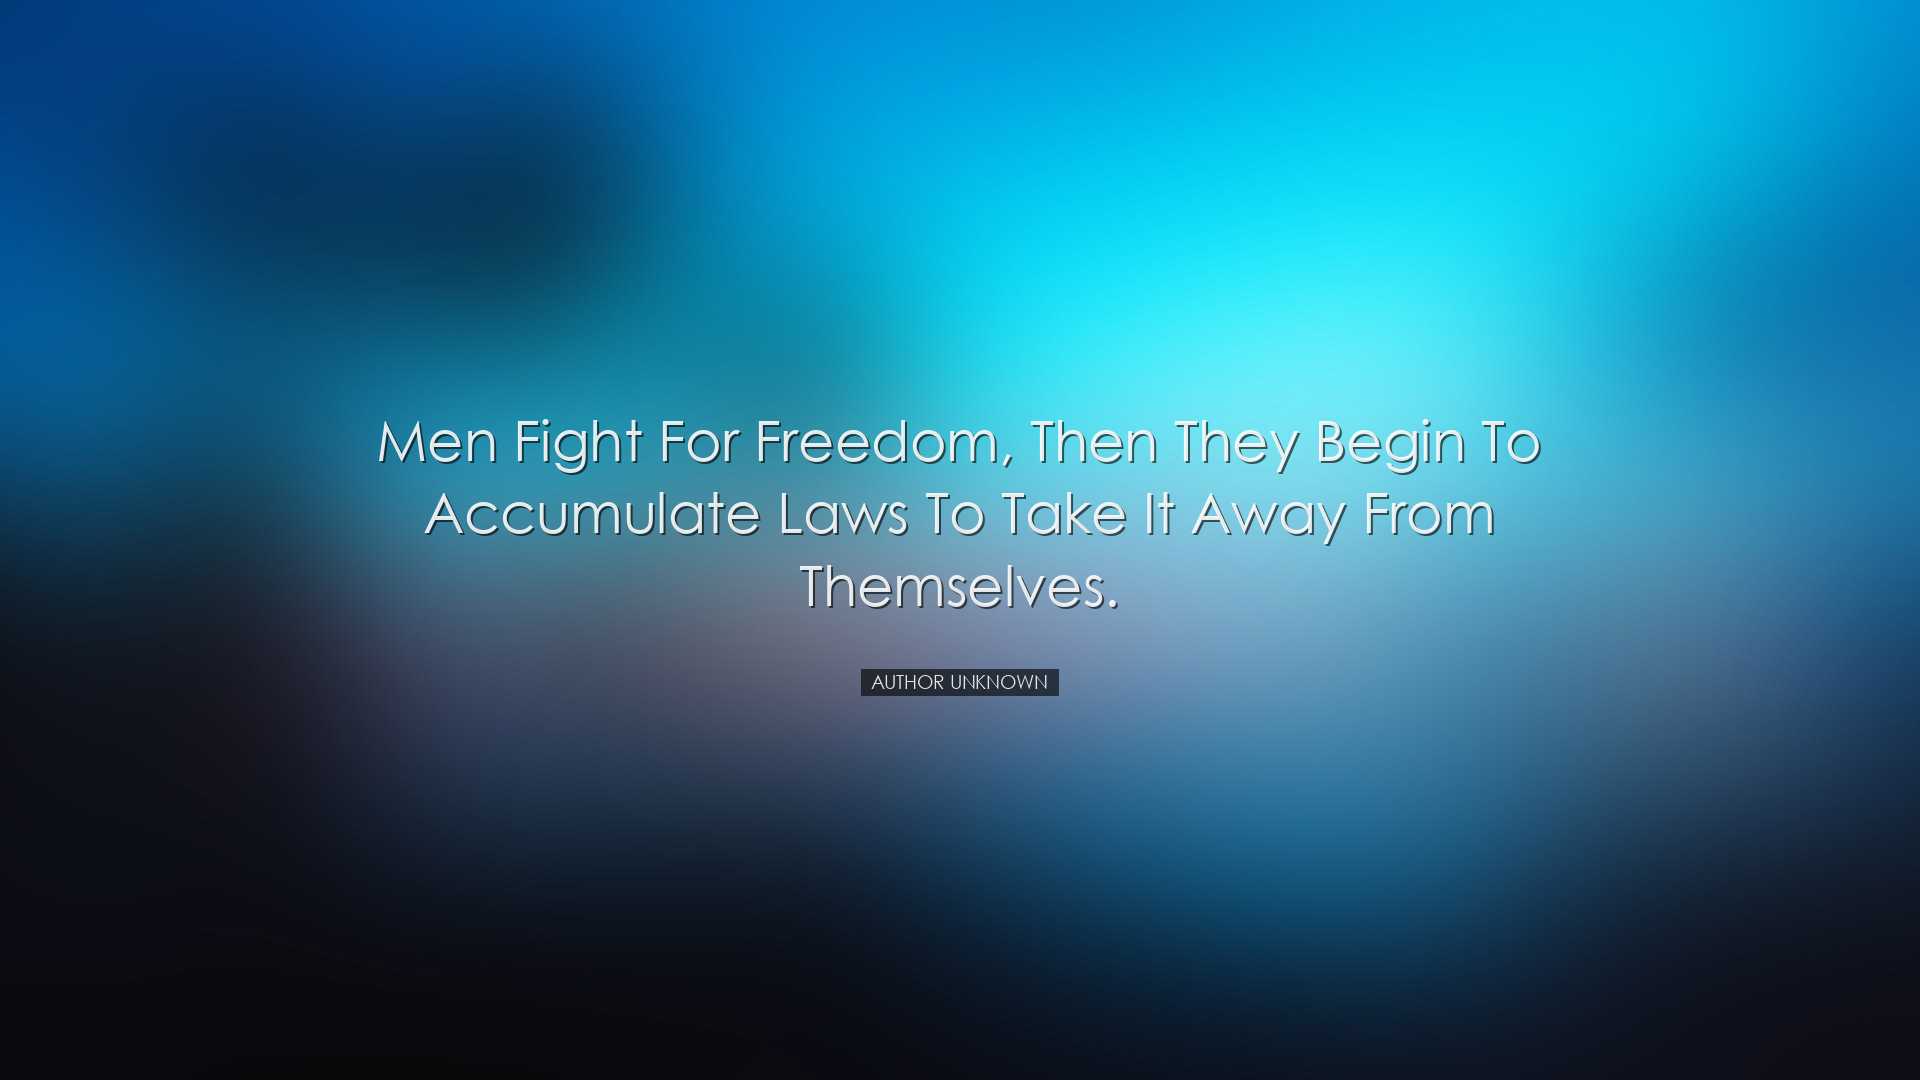 Men fight for freedom, then they begin to accumulate laws to take